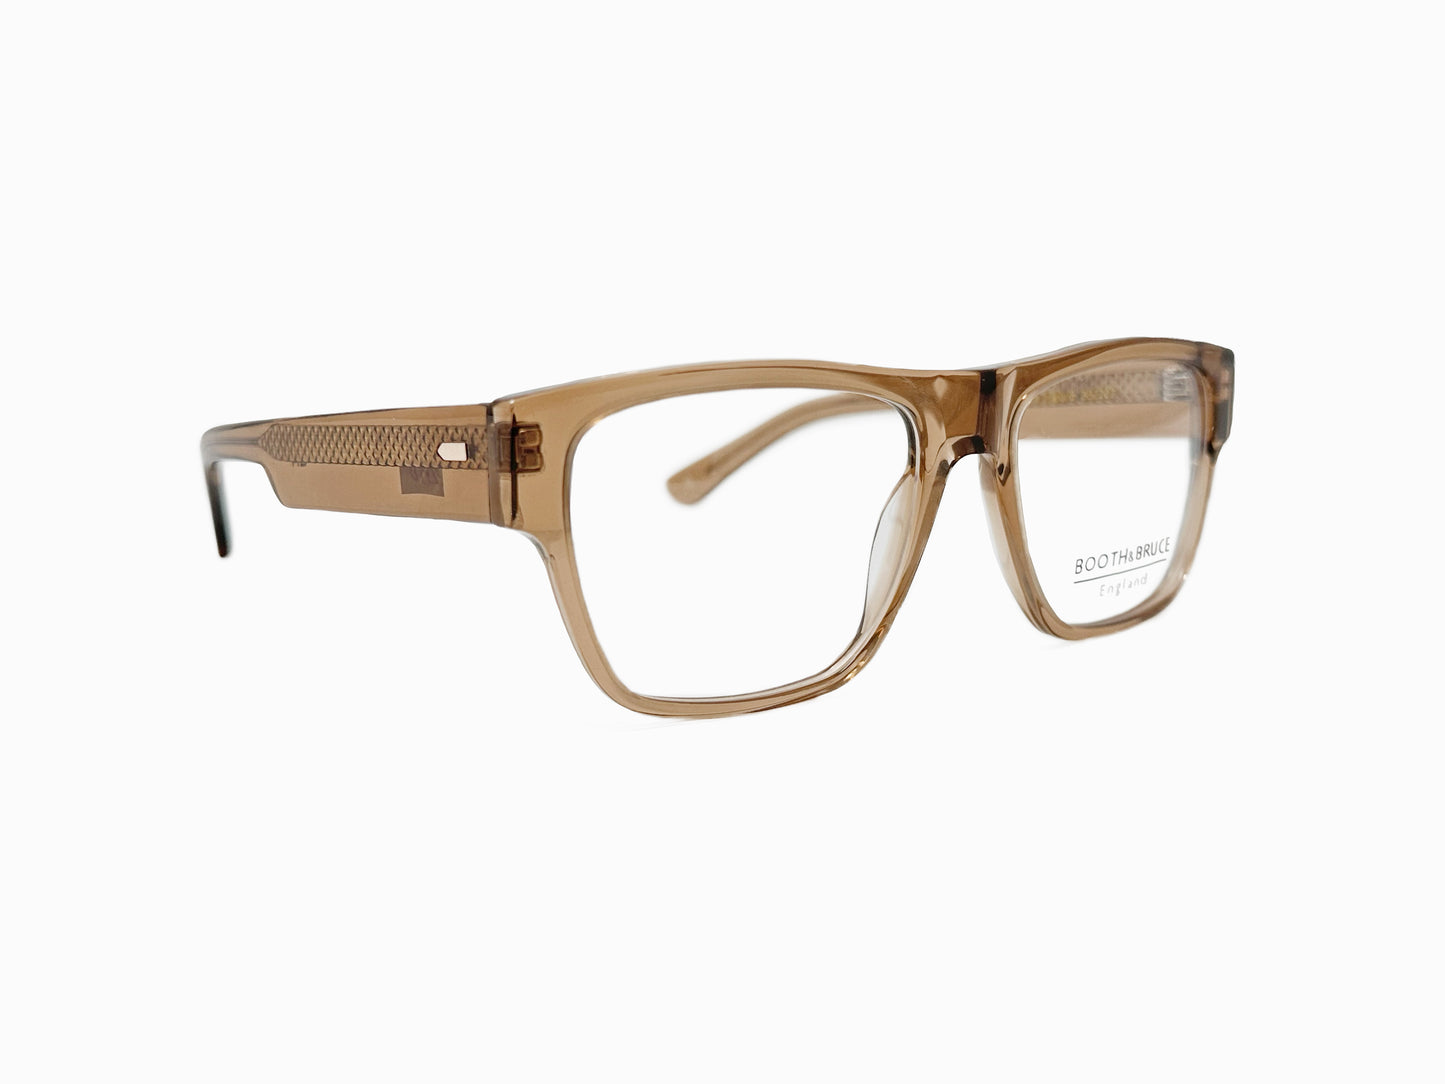 Booth & Bruce rectangular acetate optical frame with raised bridge. Model: BB2207. Color: Marmalade - Semi-transparent brown. Side view.